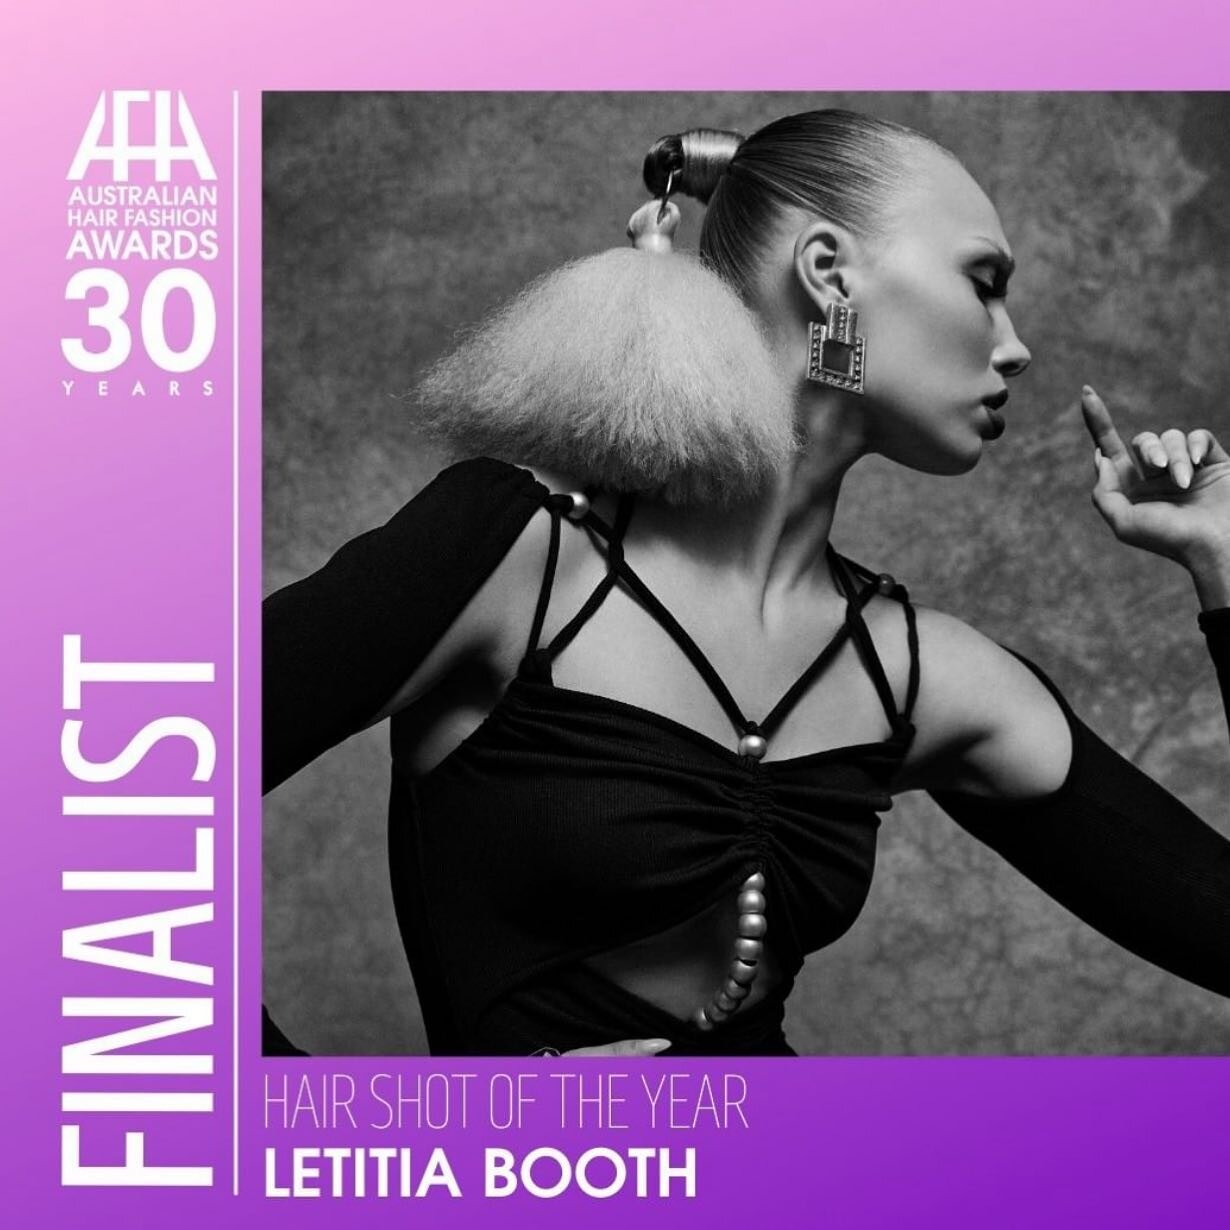 𝘾𝙊𝙉𝙂𝙍𝘼𝙏𝙐𝙇𝘼𝙏𝙄𝙊𝙉𝙎 Letitia for becoming a Finalist in &ldquo;Shot of the Year&rdquo; in the #ahfa22 
1st time entering and we are over the moon!
Thank you @aushairfashionawards @thejournalmag and congratulations to all of the entrants and